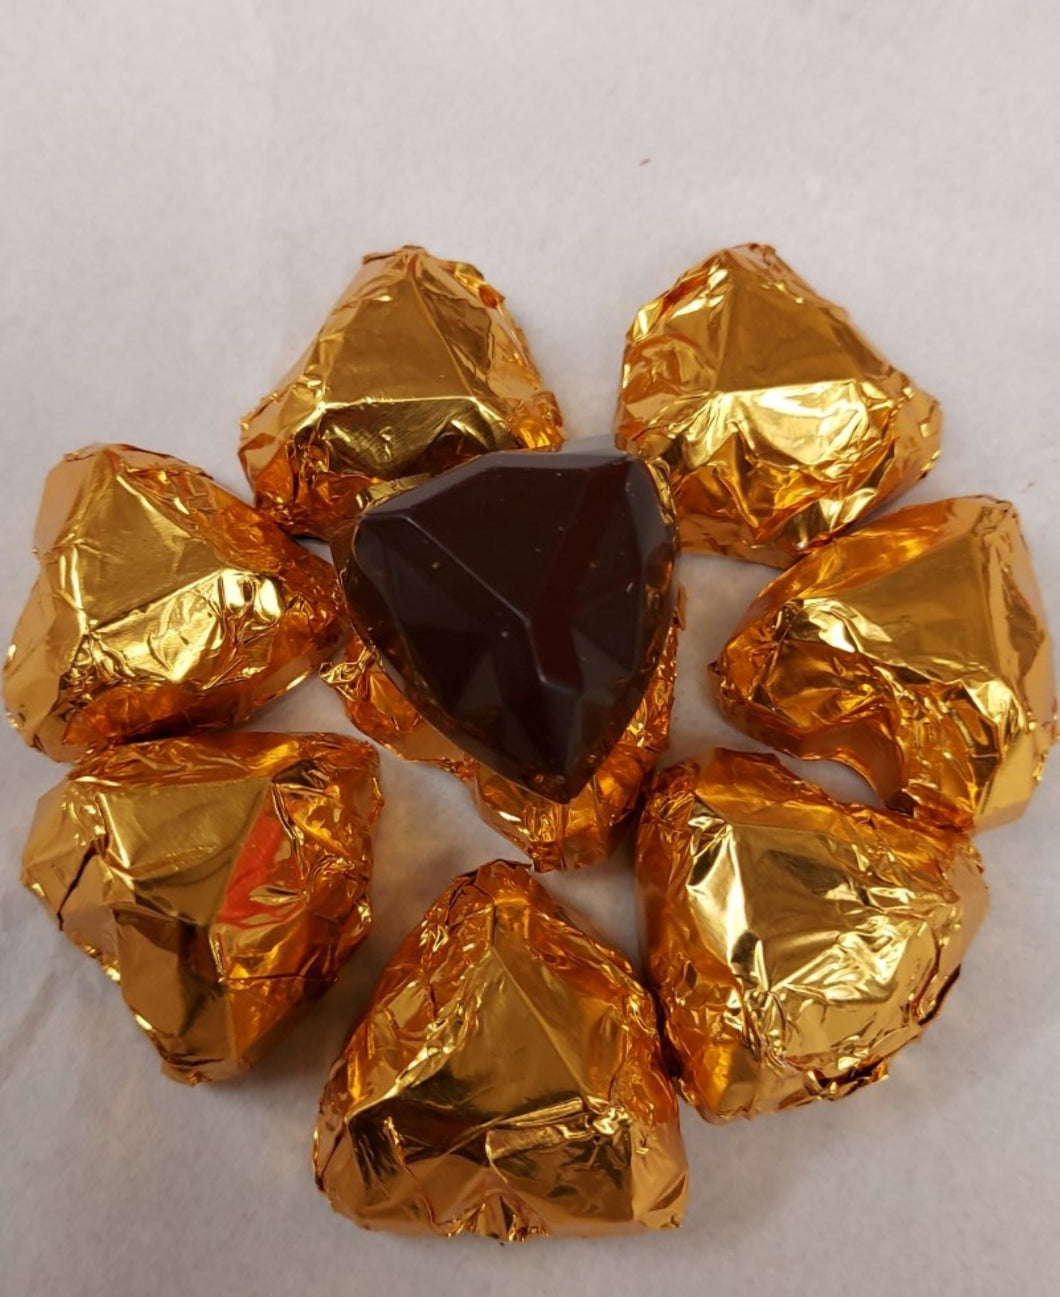 Belgian Dark Chocolate Geometrical Hearts Foil Wrapped Wedding & Party Favours